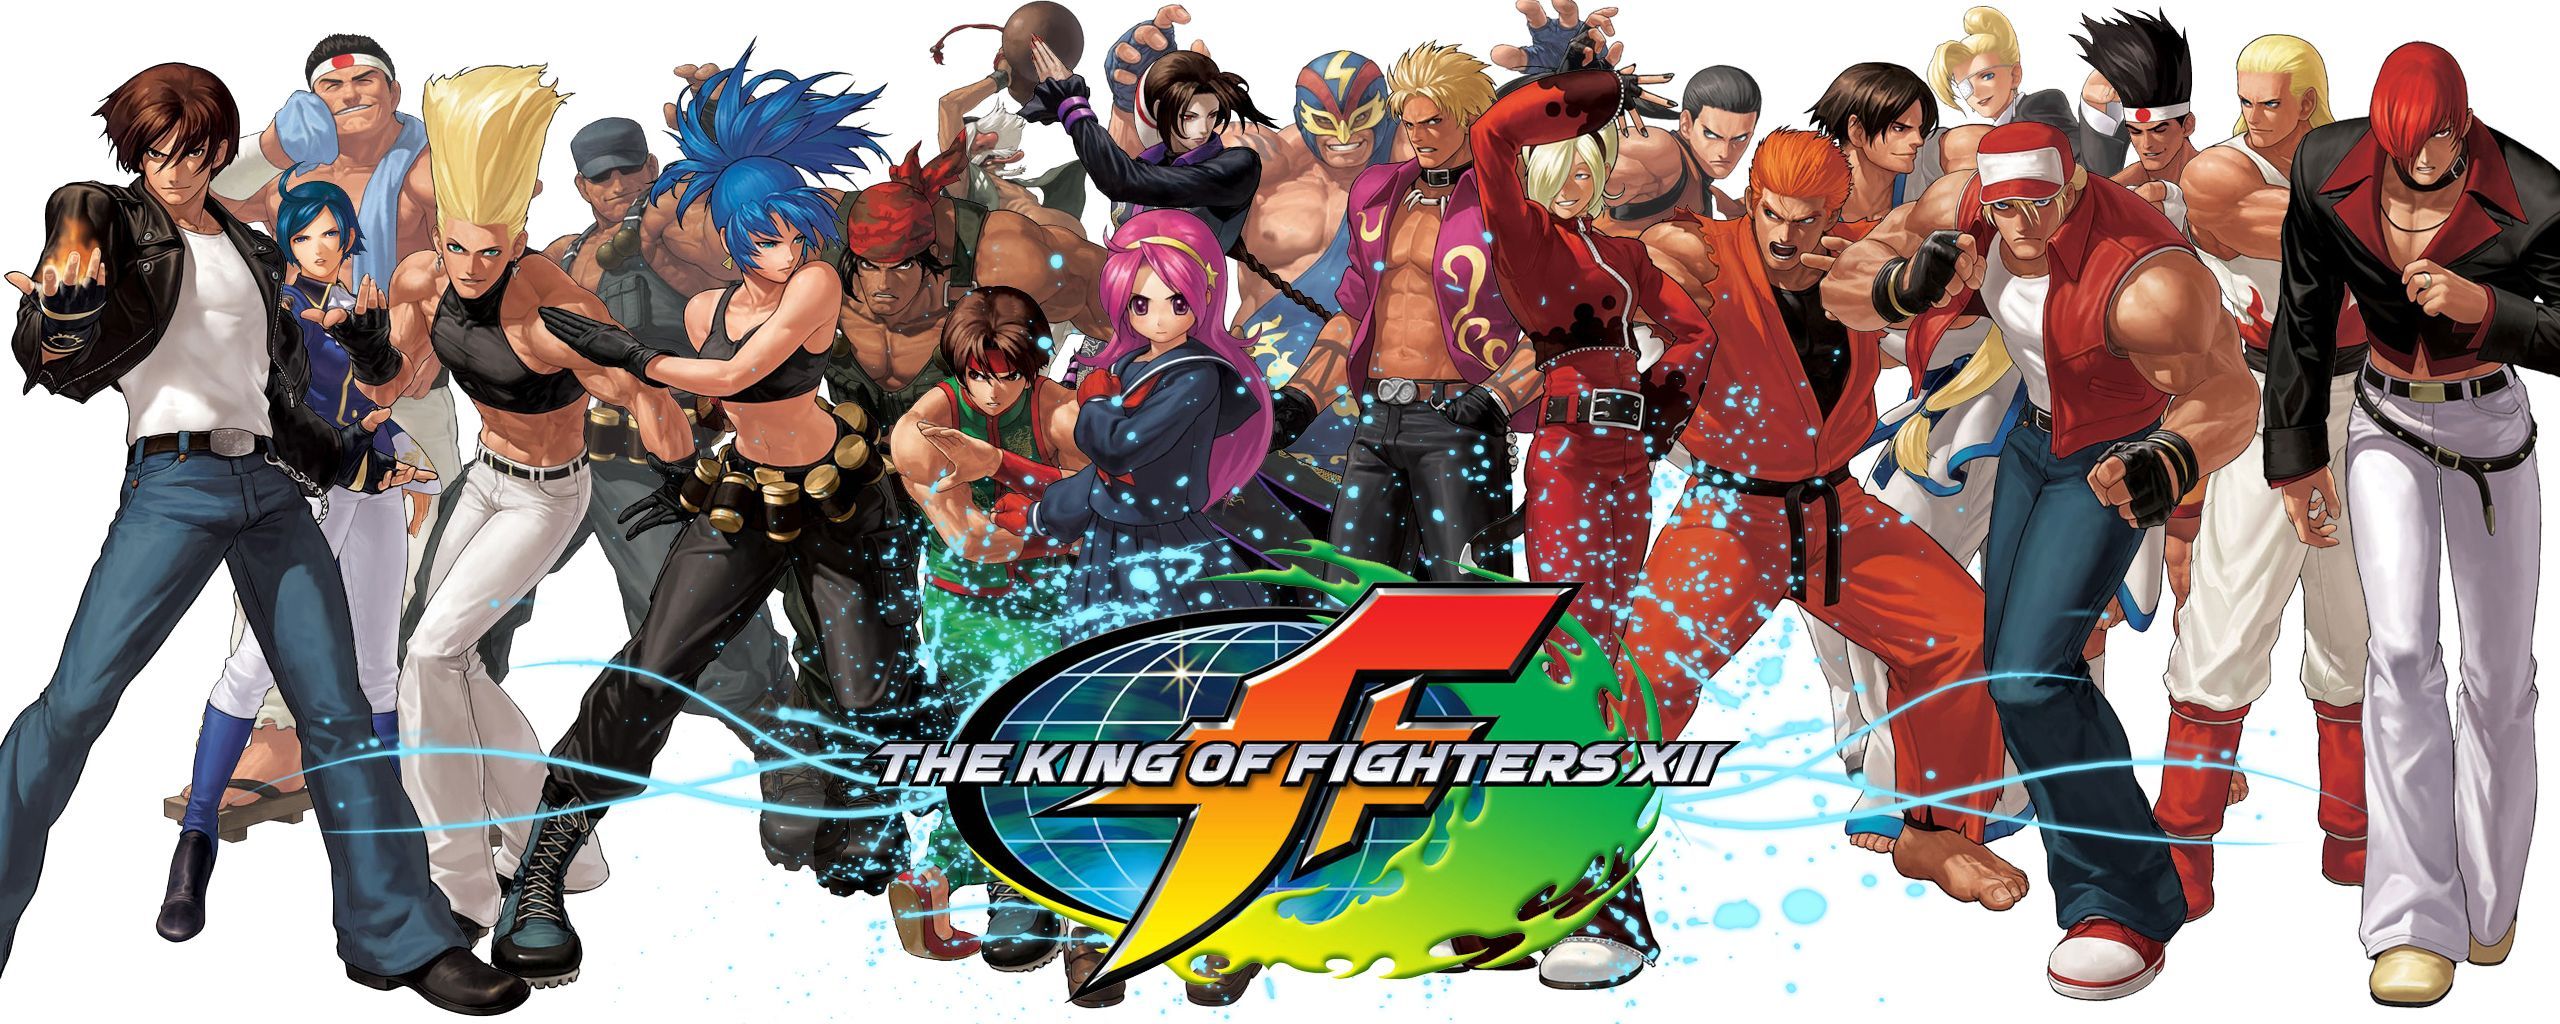 The King of Fighters Wallpaper Free The King of Fighters Background